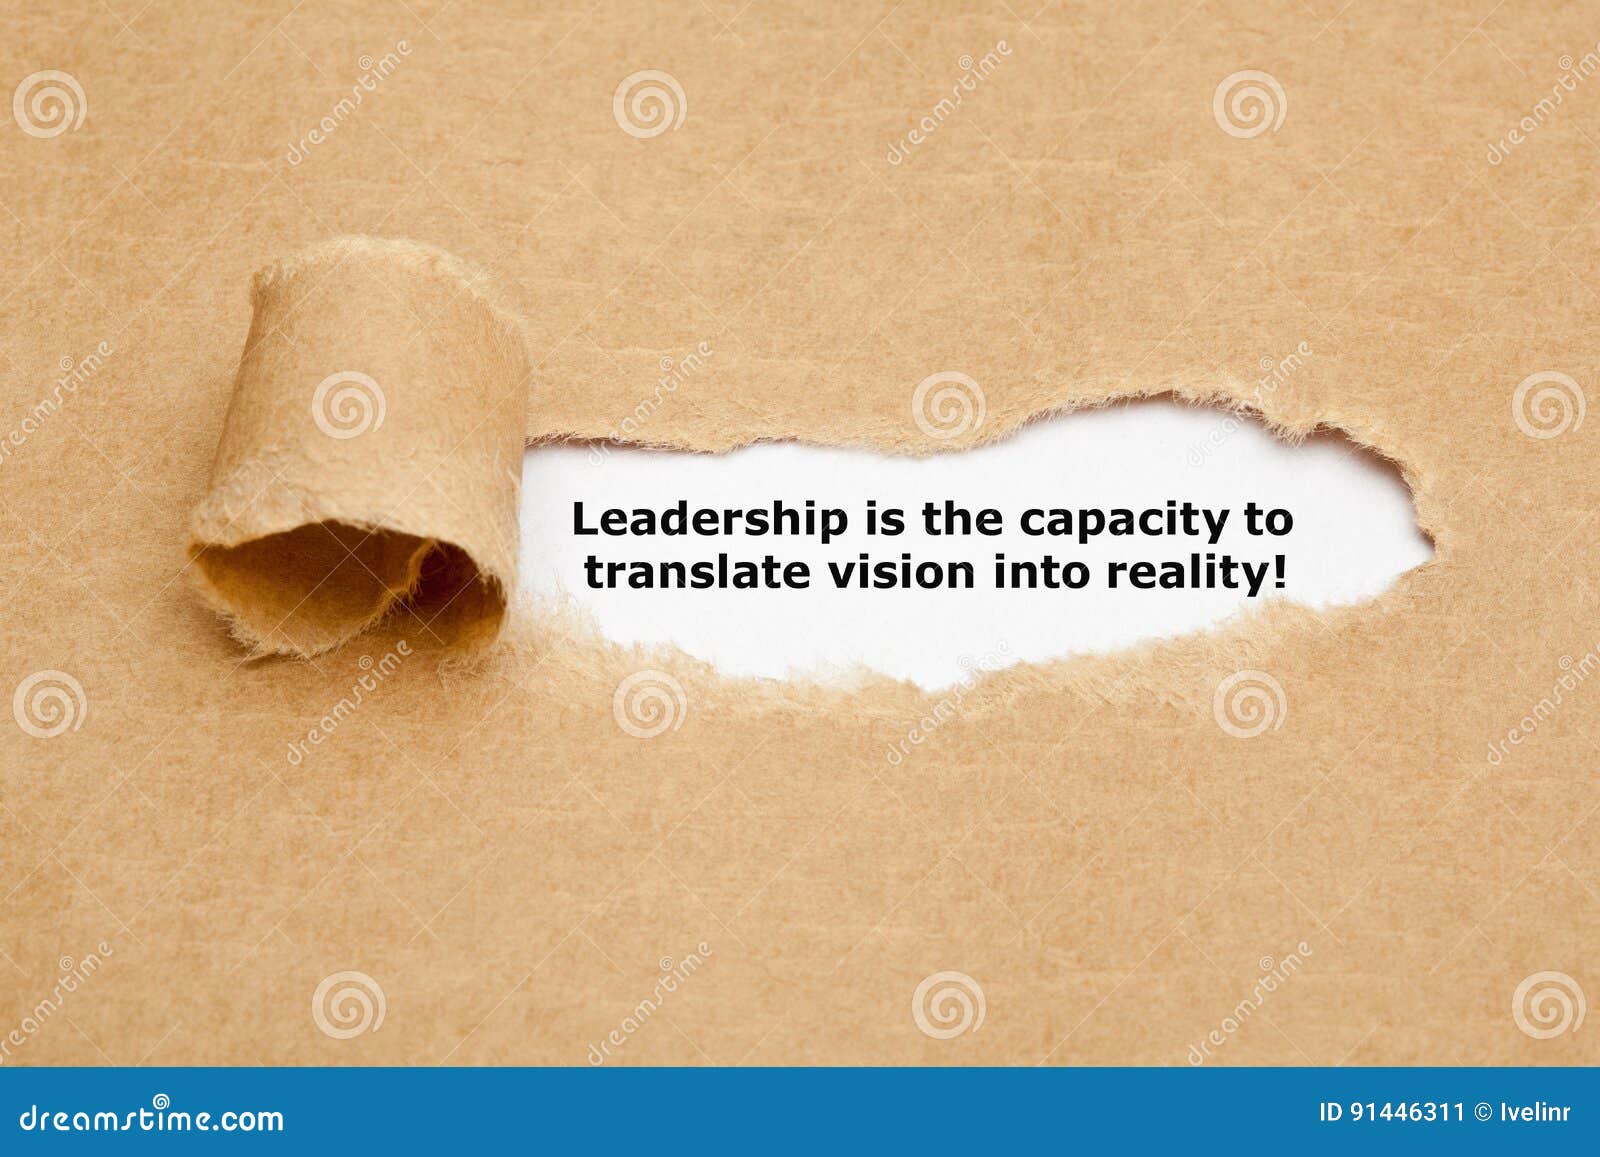 leadership is the capacity to translate vision into reality